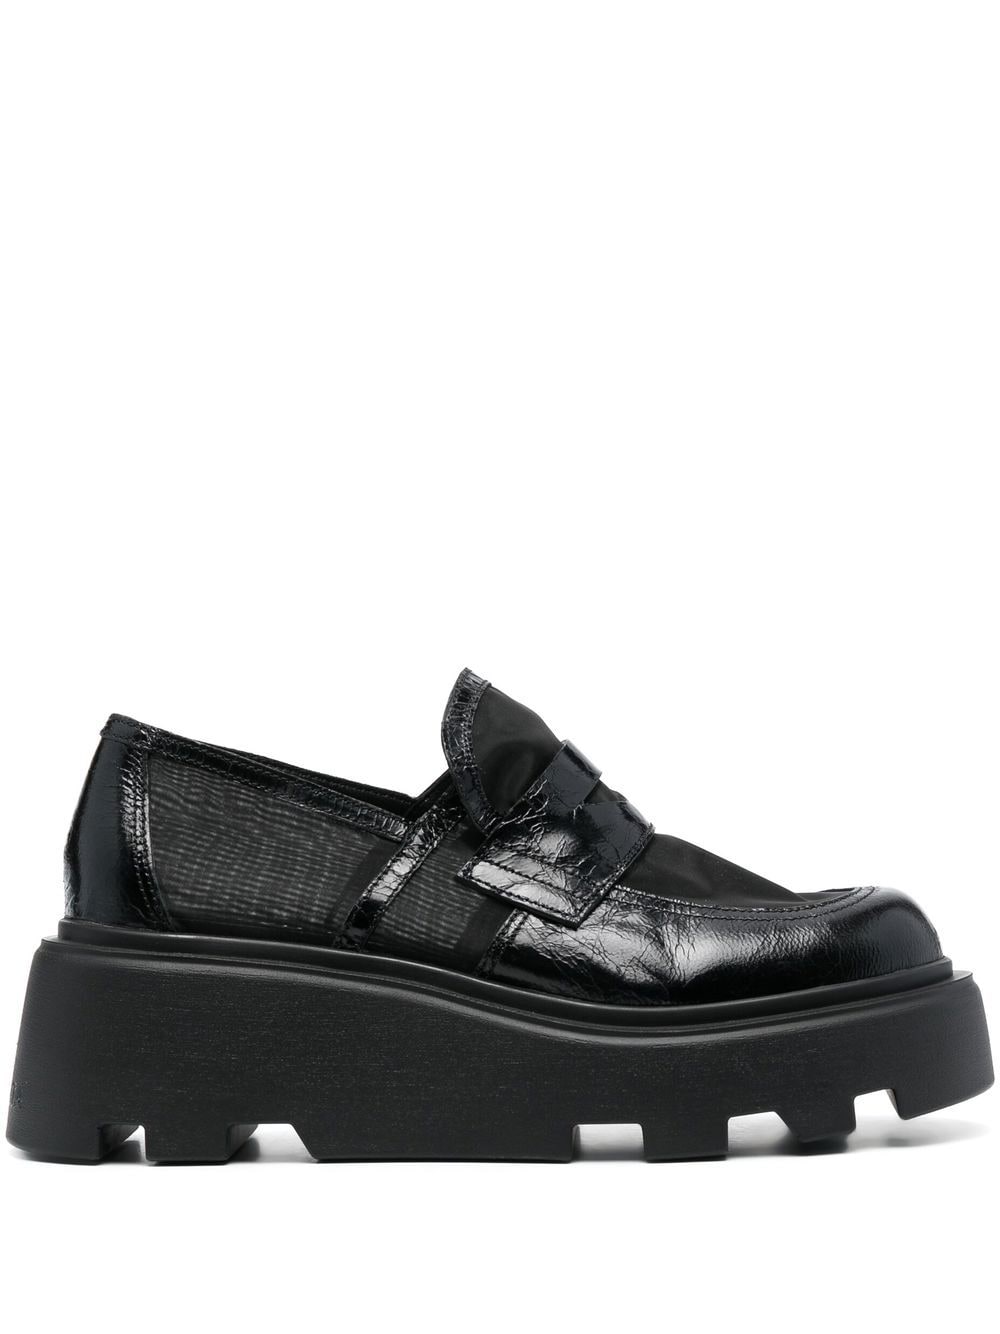 Premiata Panelled Leather Loafers In Black